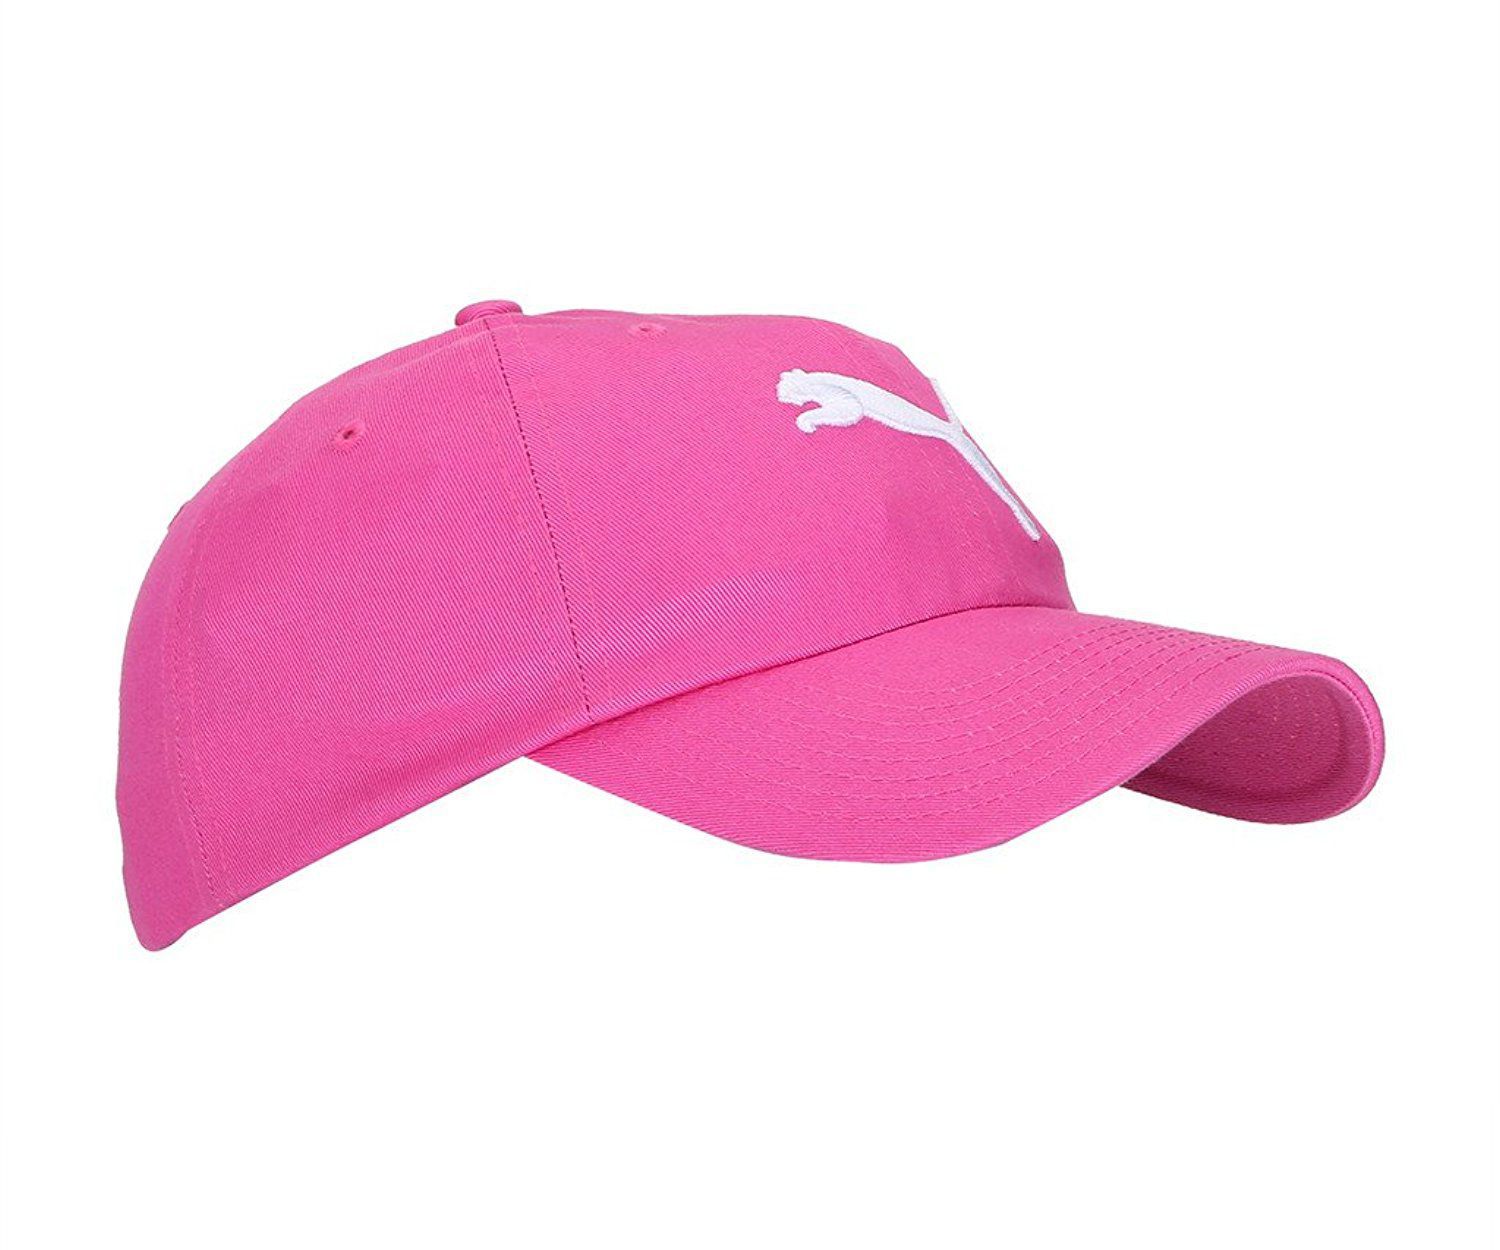 Puma Pink Plain Polyester Caps - Buy Online @ Rs. | Snapdeal